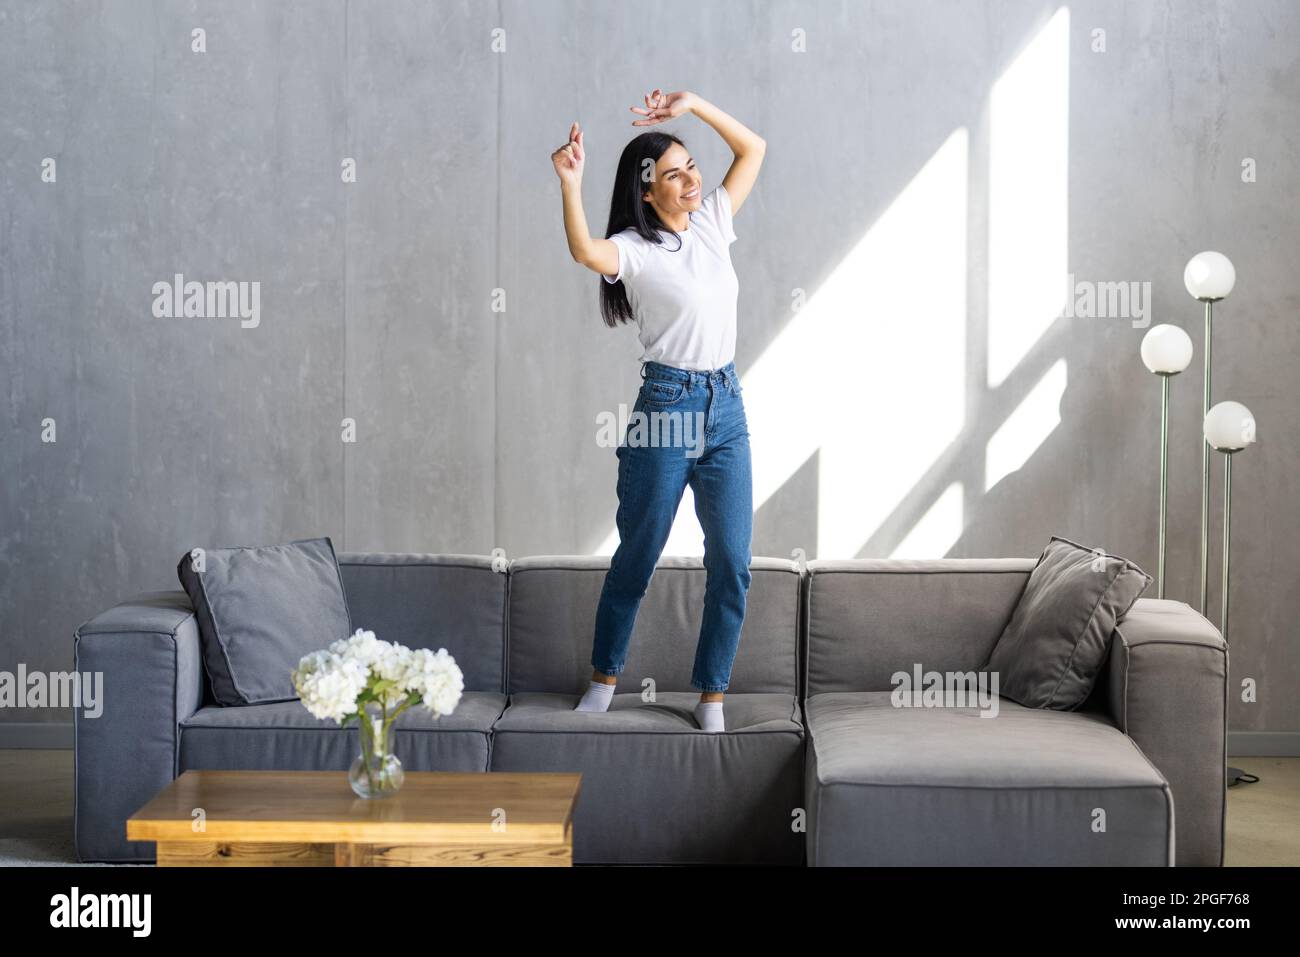 Shot of funny woman listening to music with smartphone while dancing on the couch in the living room at home. Stock Photo